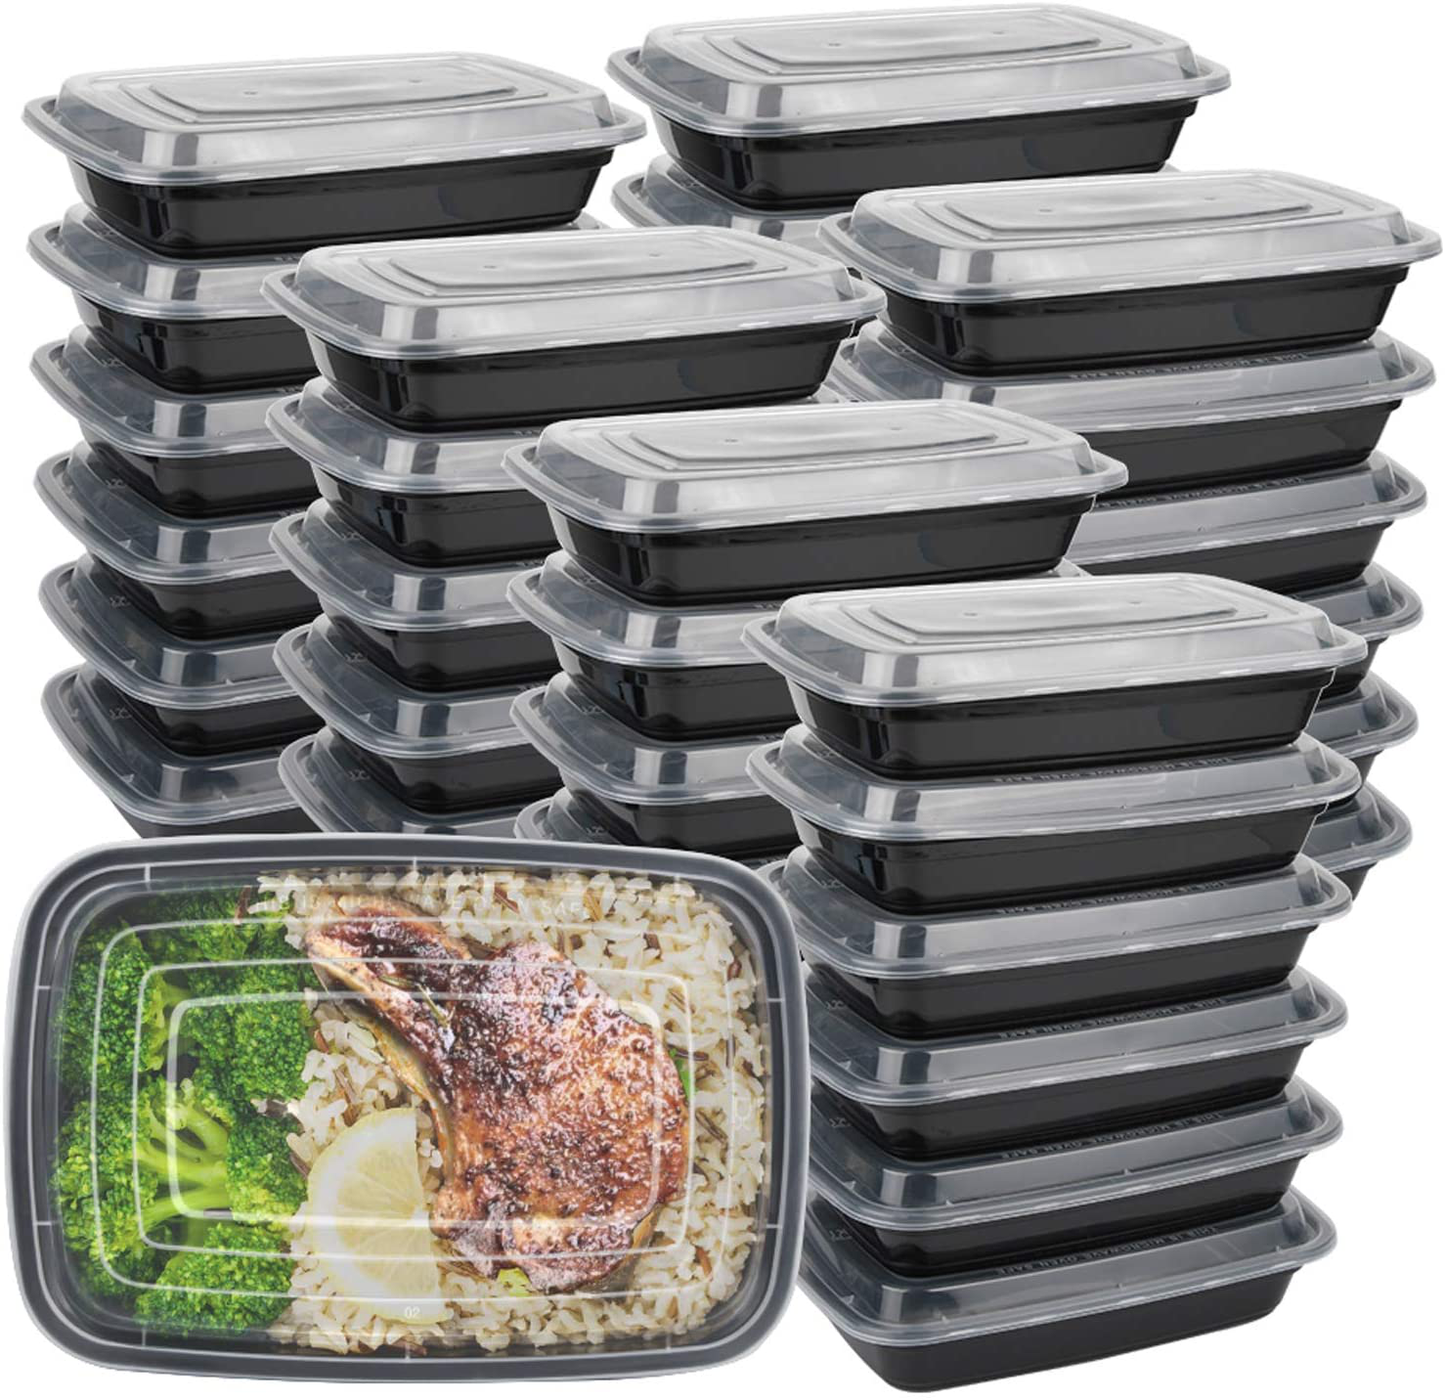 IUMÉ 50-Pack Food Prep Container, 750ML/ 26 OZ Microwavable Containers with Lids for Food Prepping, Disposable Plastic Boxes BPA Free Lunch Boxes- Stackable, Reusable Dishwasher Healthy